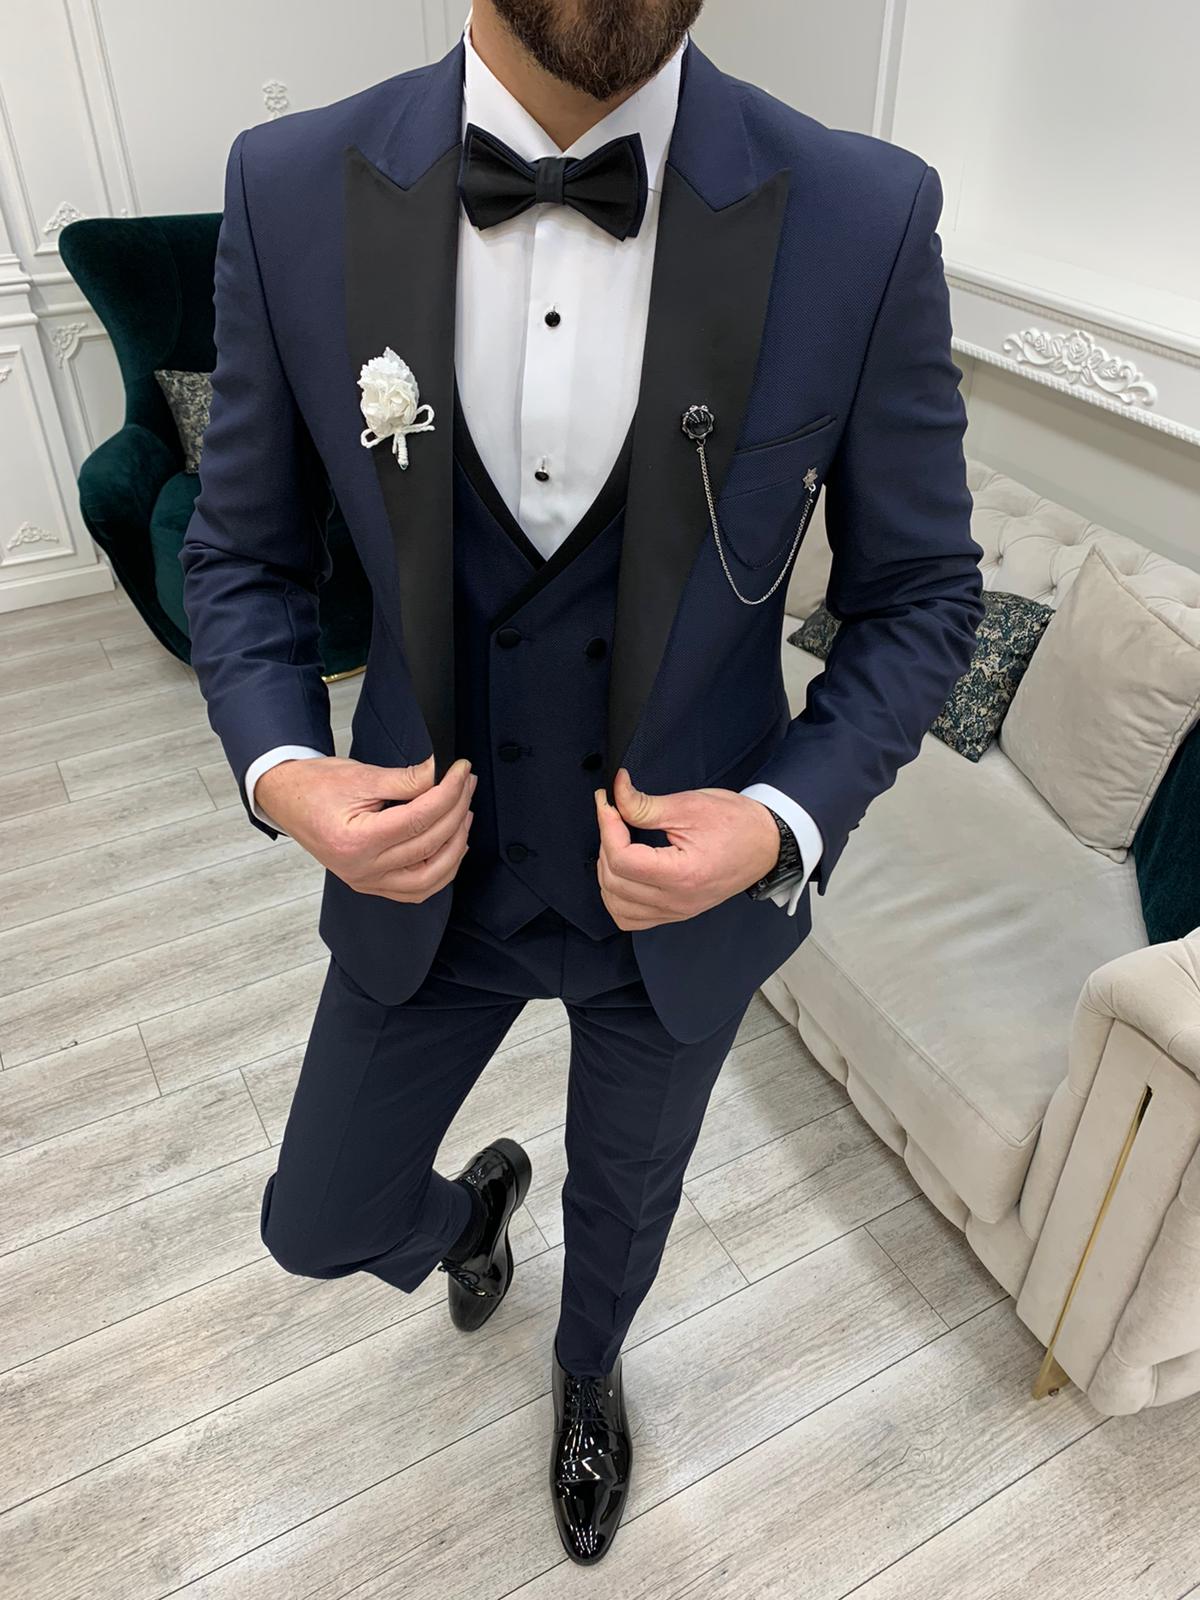 Navy Blue Groom Wedding Tuxedo Suit for Men by GentWith.com with Free Worldwide Shipping